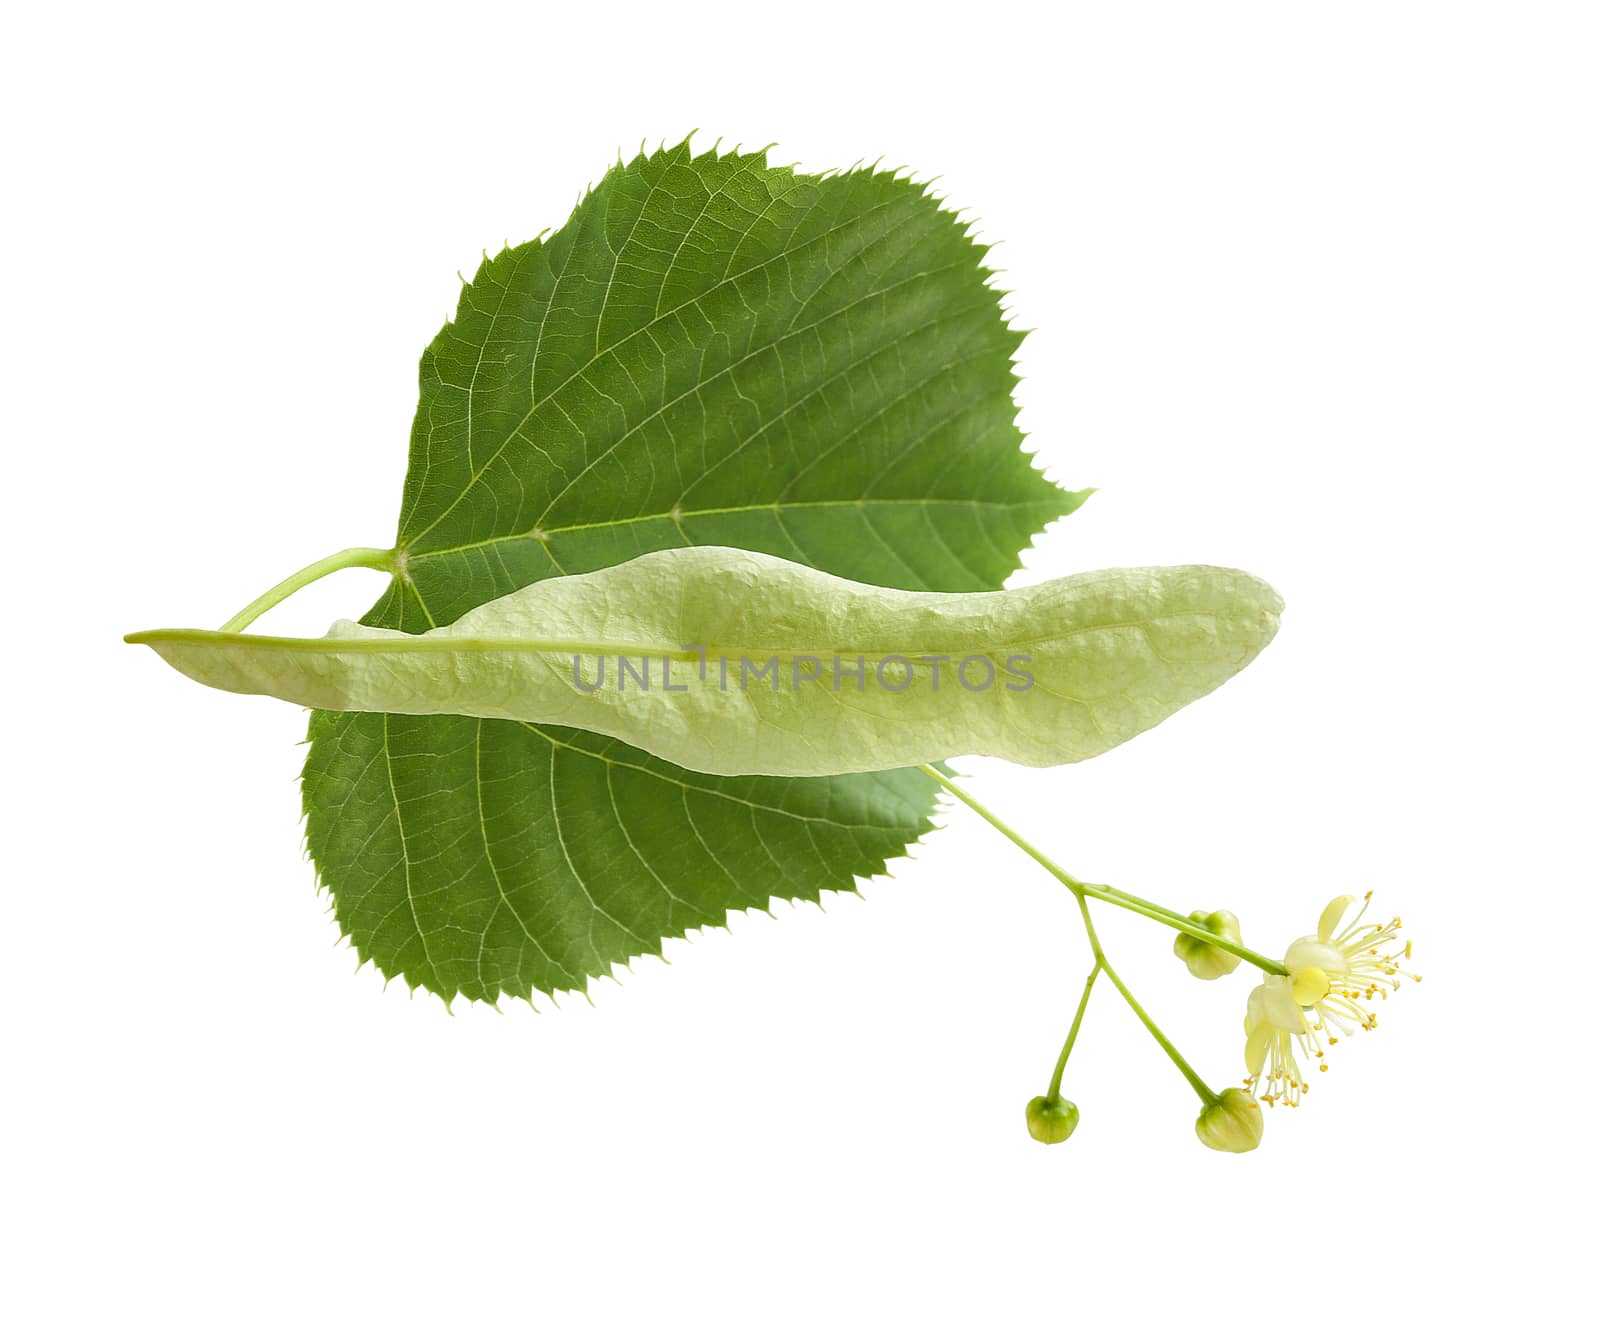 Flower and leaf of linden by Angorius